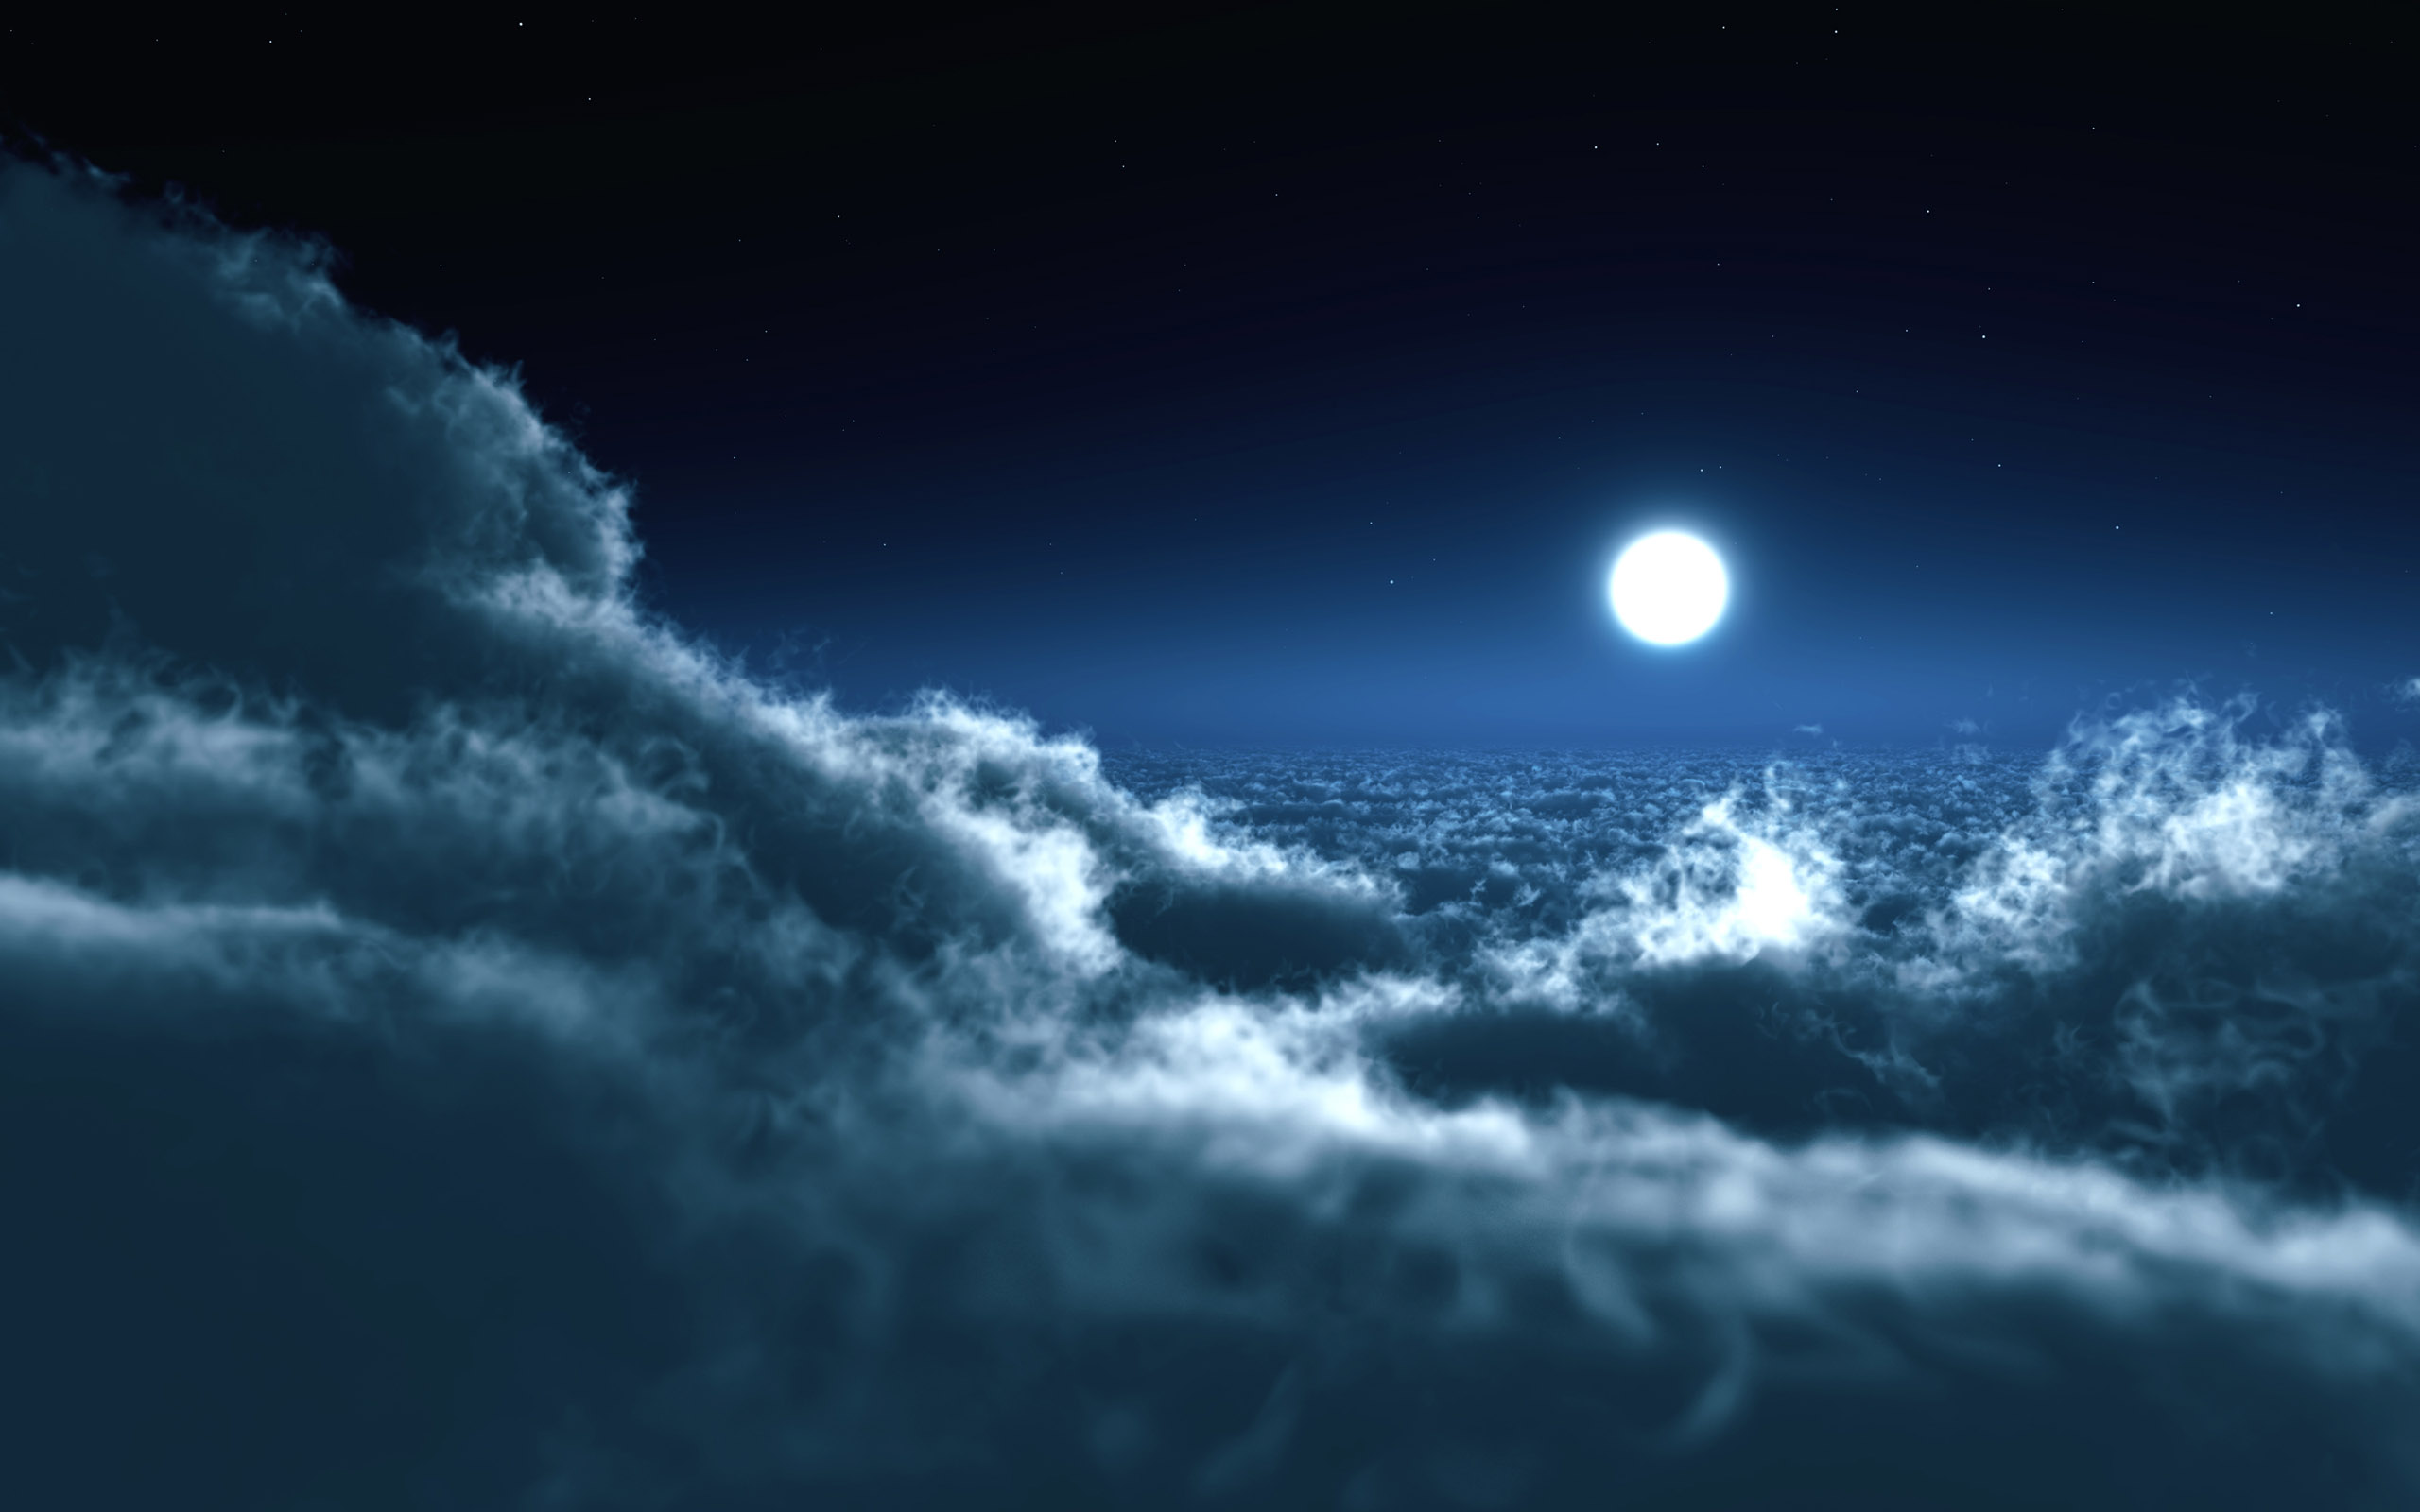  clouds night sky wallpapers and images   wallpapers pictures photos 2560x1600